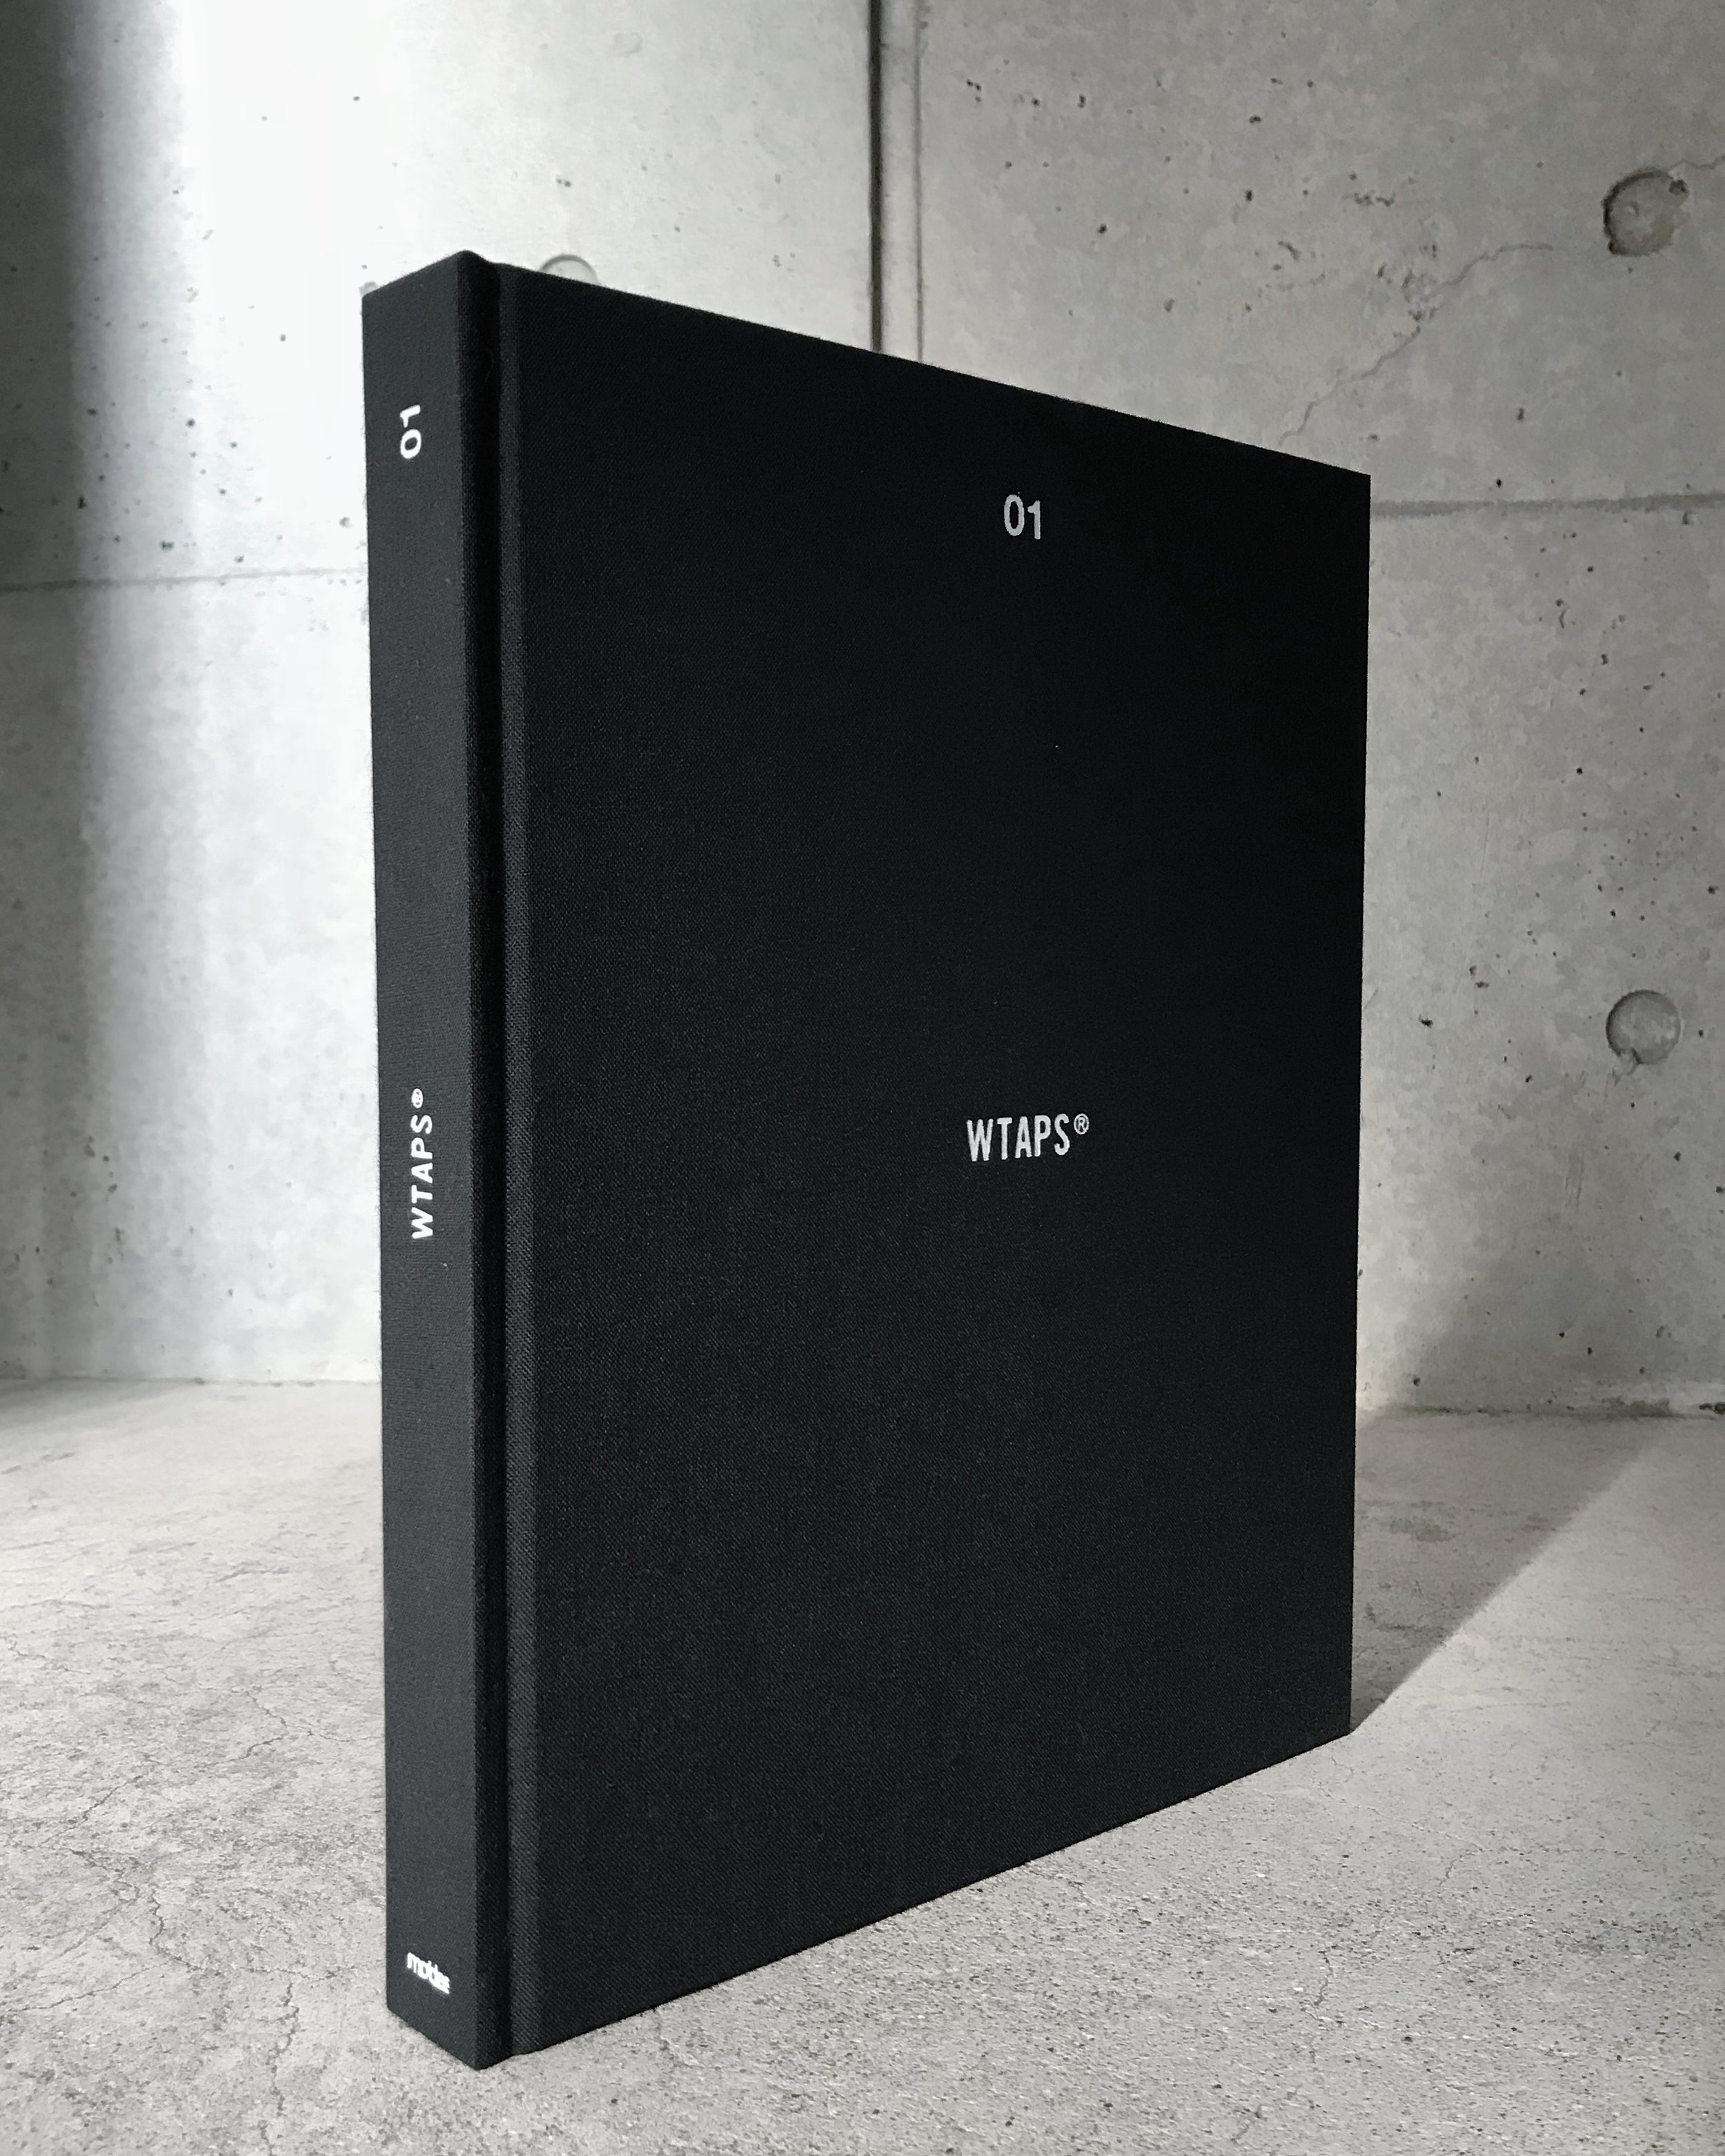 Your last chance to buy the WTAPS 01 book — eye_C